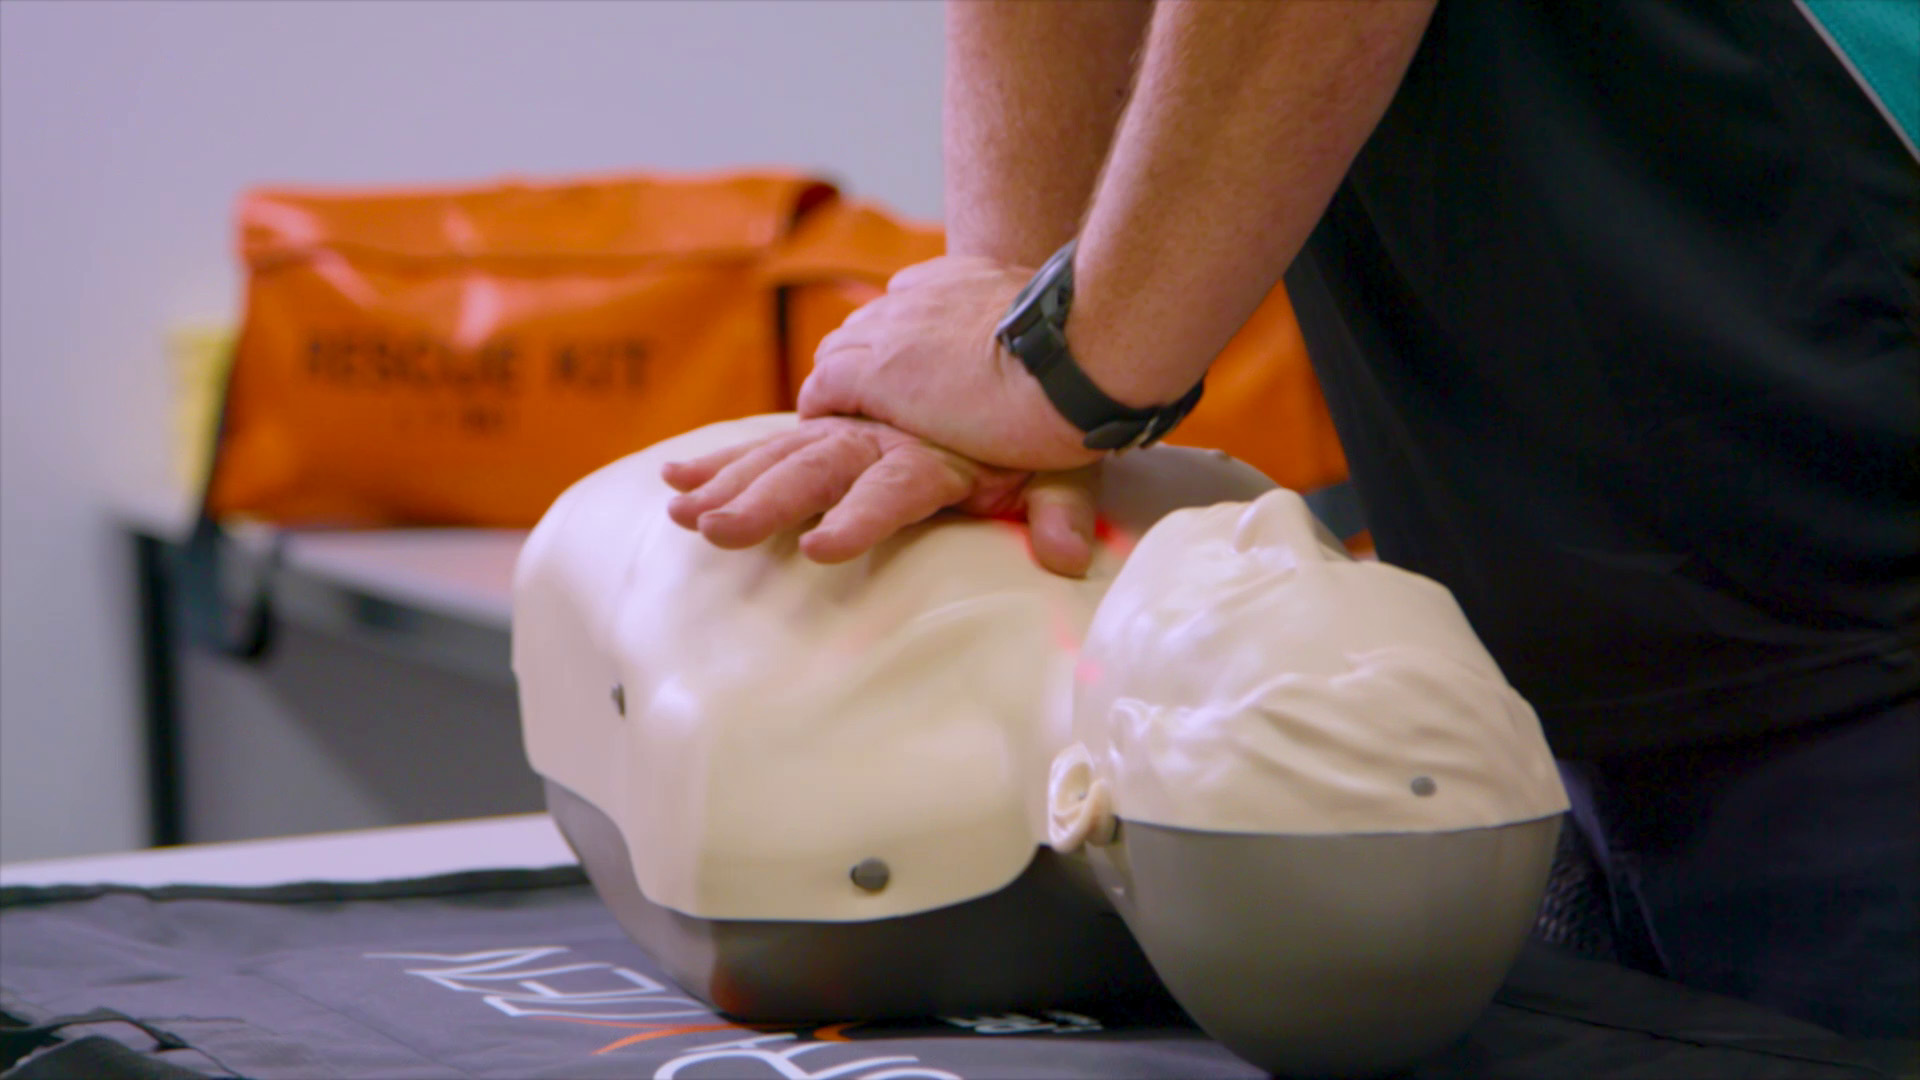 Provide Advanced Resuscitation and Oxygen Therapy Training